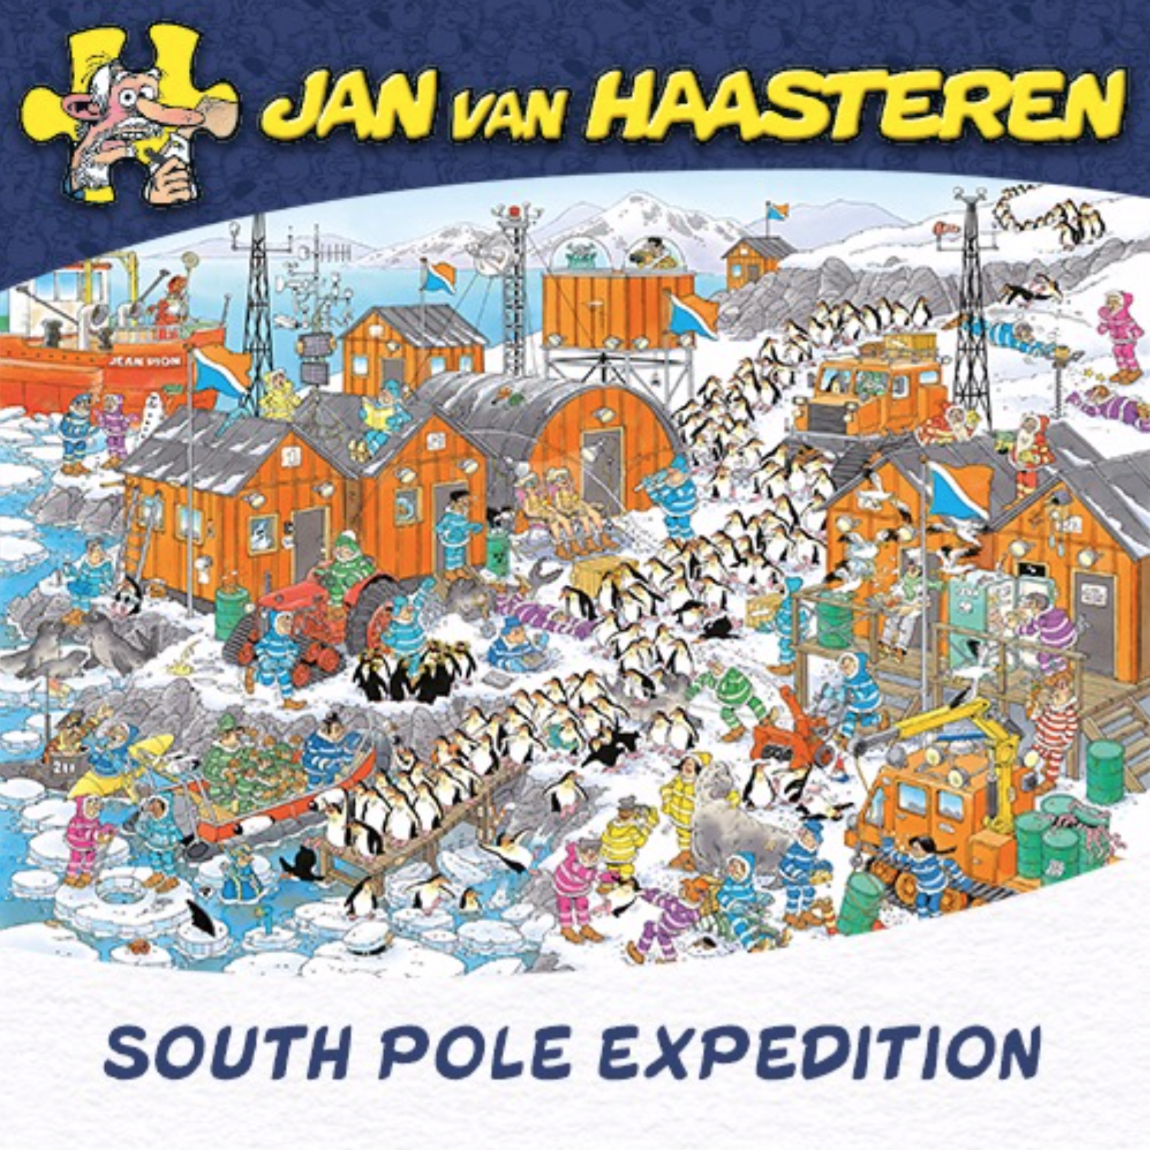 Jumbo Jan van Haasteren JVH South Pole Expedition Jigsaw Puzzle 1000 Pieces 